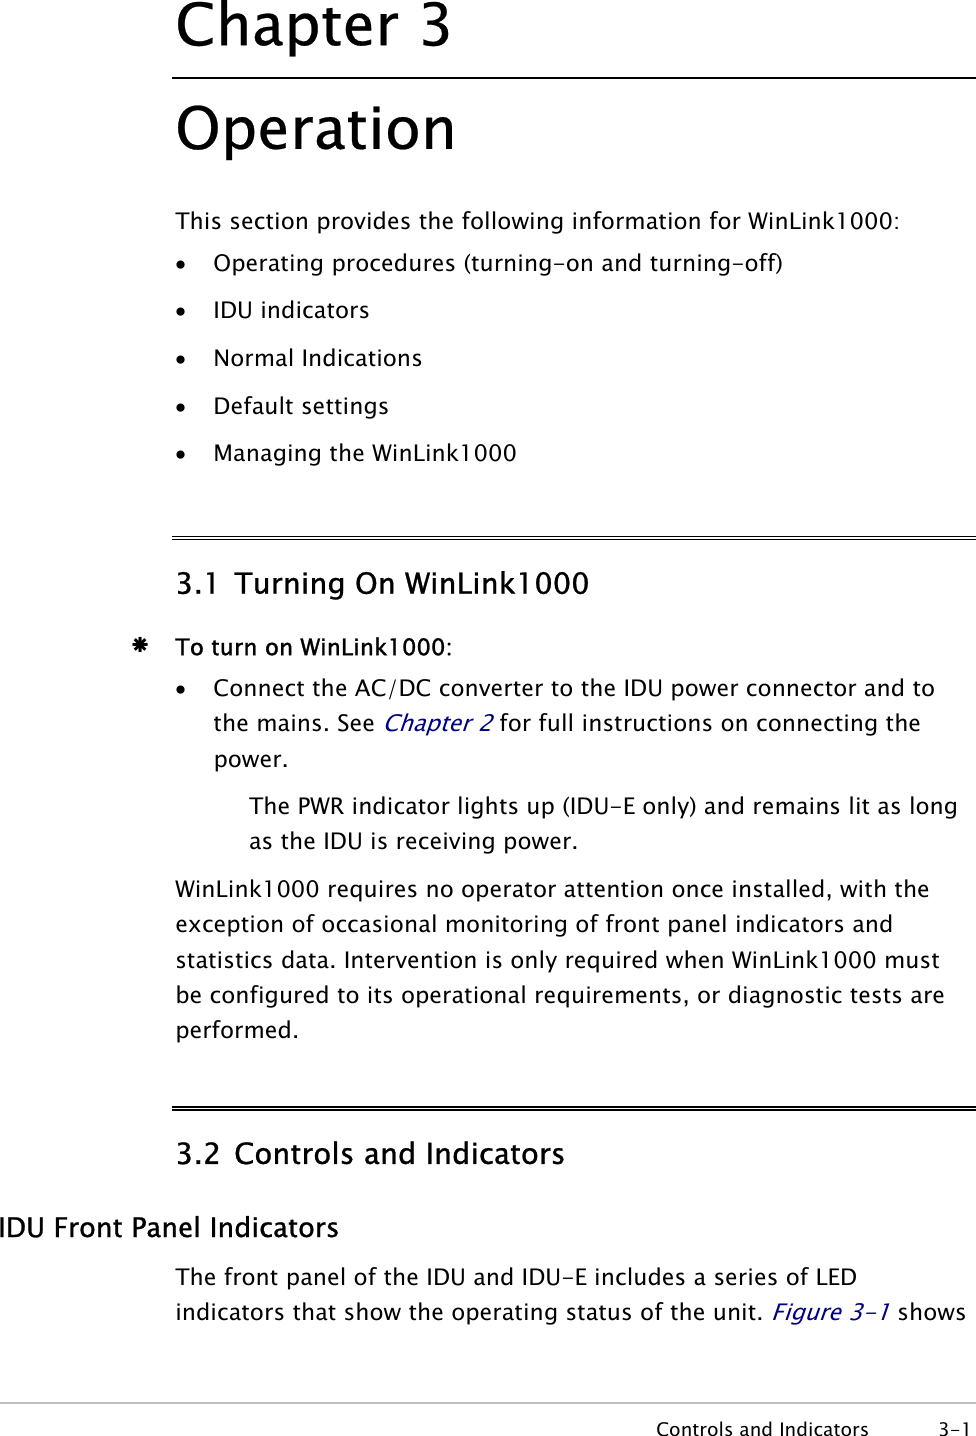 Chapter  3 Operation This section provides the following information for WinLink1000: • Operating procedures (turning-on and turning-off) • IDU indicators • Normal Indications • Default settings • Managing the WinLink1000 3.1 Turning On WinLink1000 Æ To turn on WinLink1000: • Connect the AC/DC converter to the IDU power connector and to the mains. See Chapter 2 for full instructions on connecting the power. The PWR indicator lights up (IDU-E only) and remains lit as long as the IDU is receiving power. WinLink1000 requires no operator attention once installed, with the exception of occasional monitoring of front panel indicators and statistics data. Intervention is only required when WinLink1000 must be configured to its operational requirements, or diagnostic tests are performed. 3.2 Controls and Indicators IDU Front Panel Indicators The front panel of the IDU and IDU-E includes a series of LED indicators that show the operating status of the unit. Figure  3-1 shows  Controls and Indicators  3-1 